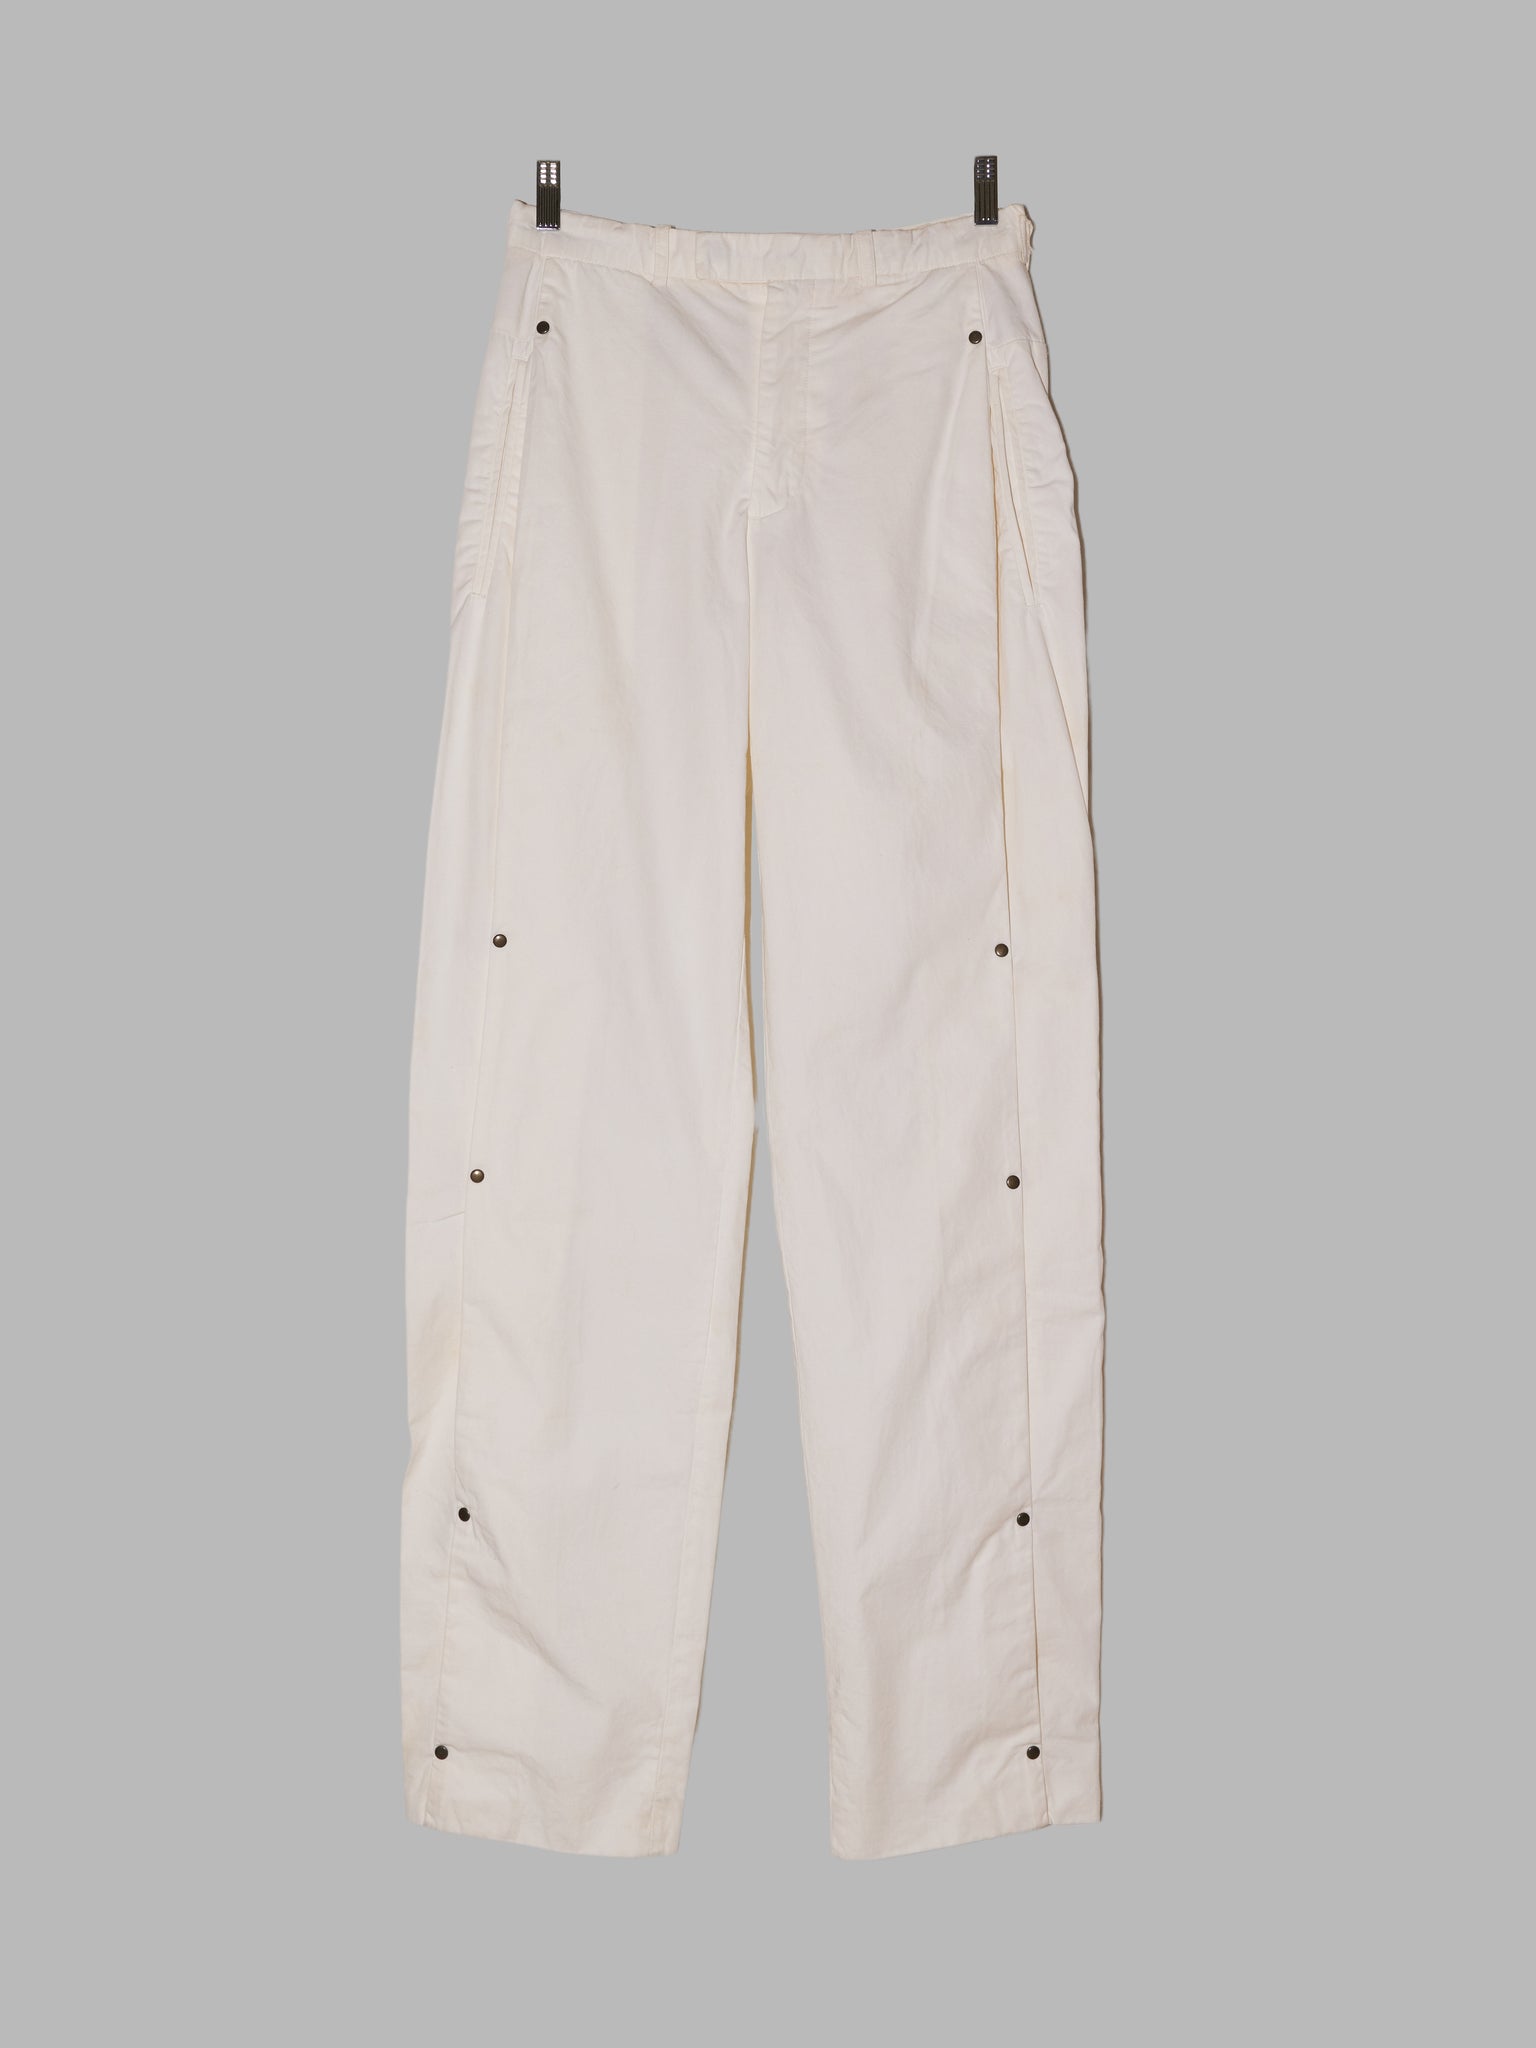 Dirk Schonberger 1990s off-white cotton stud detail pleated trousers - sz 44